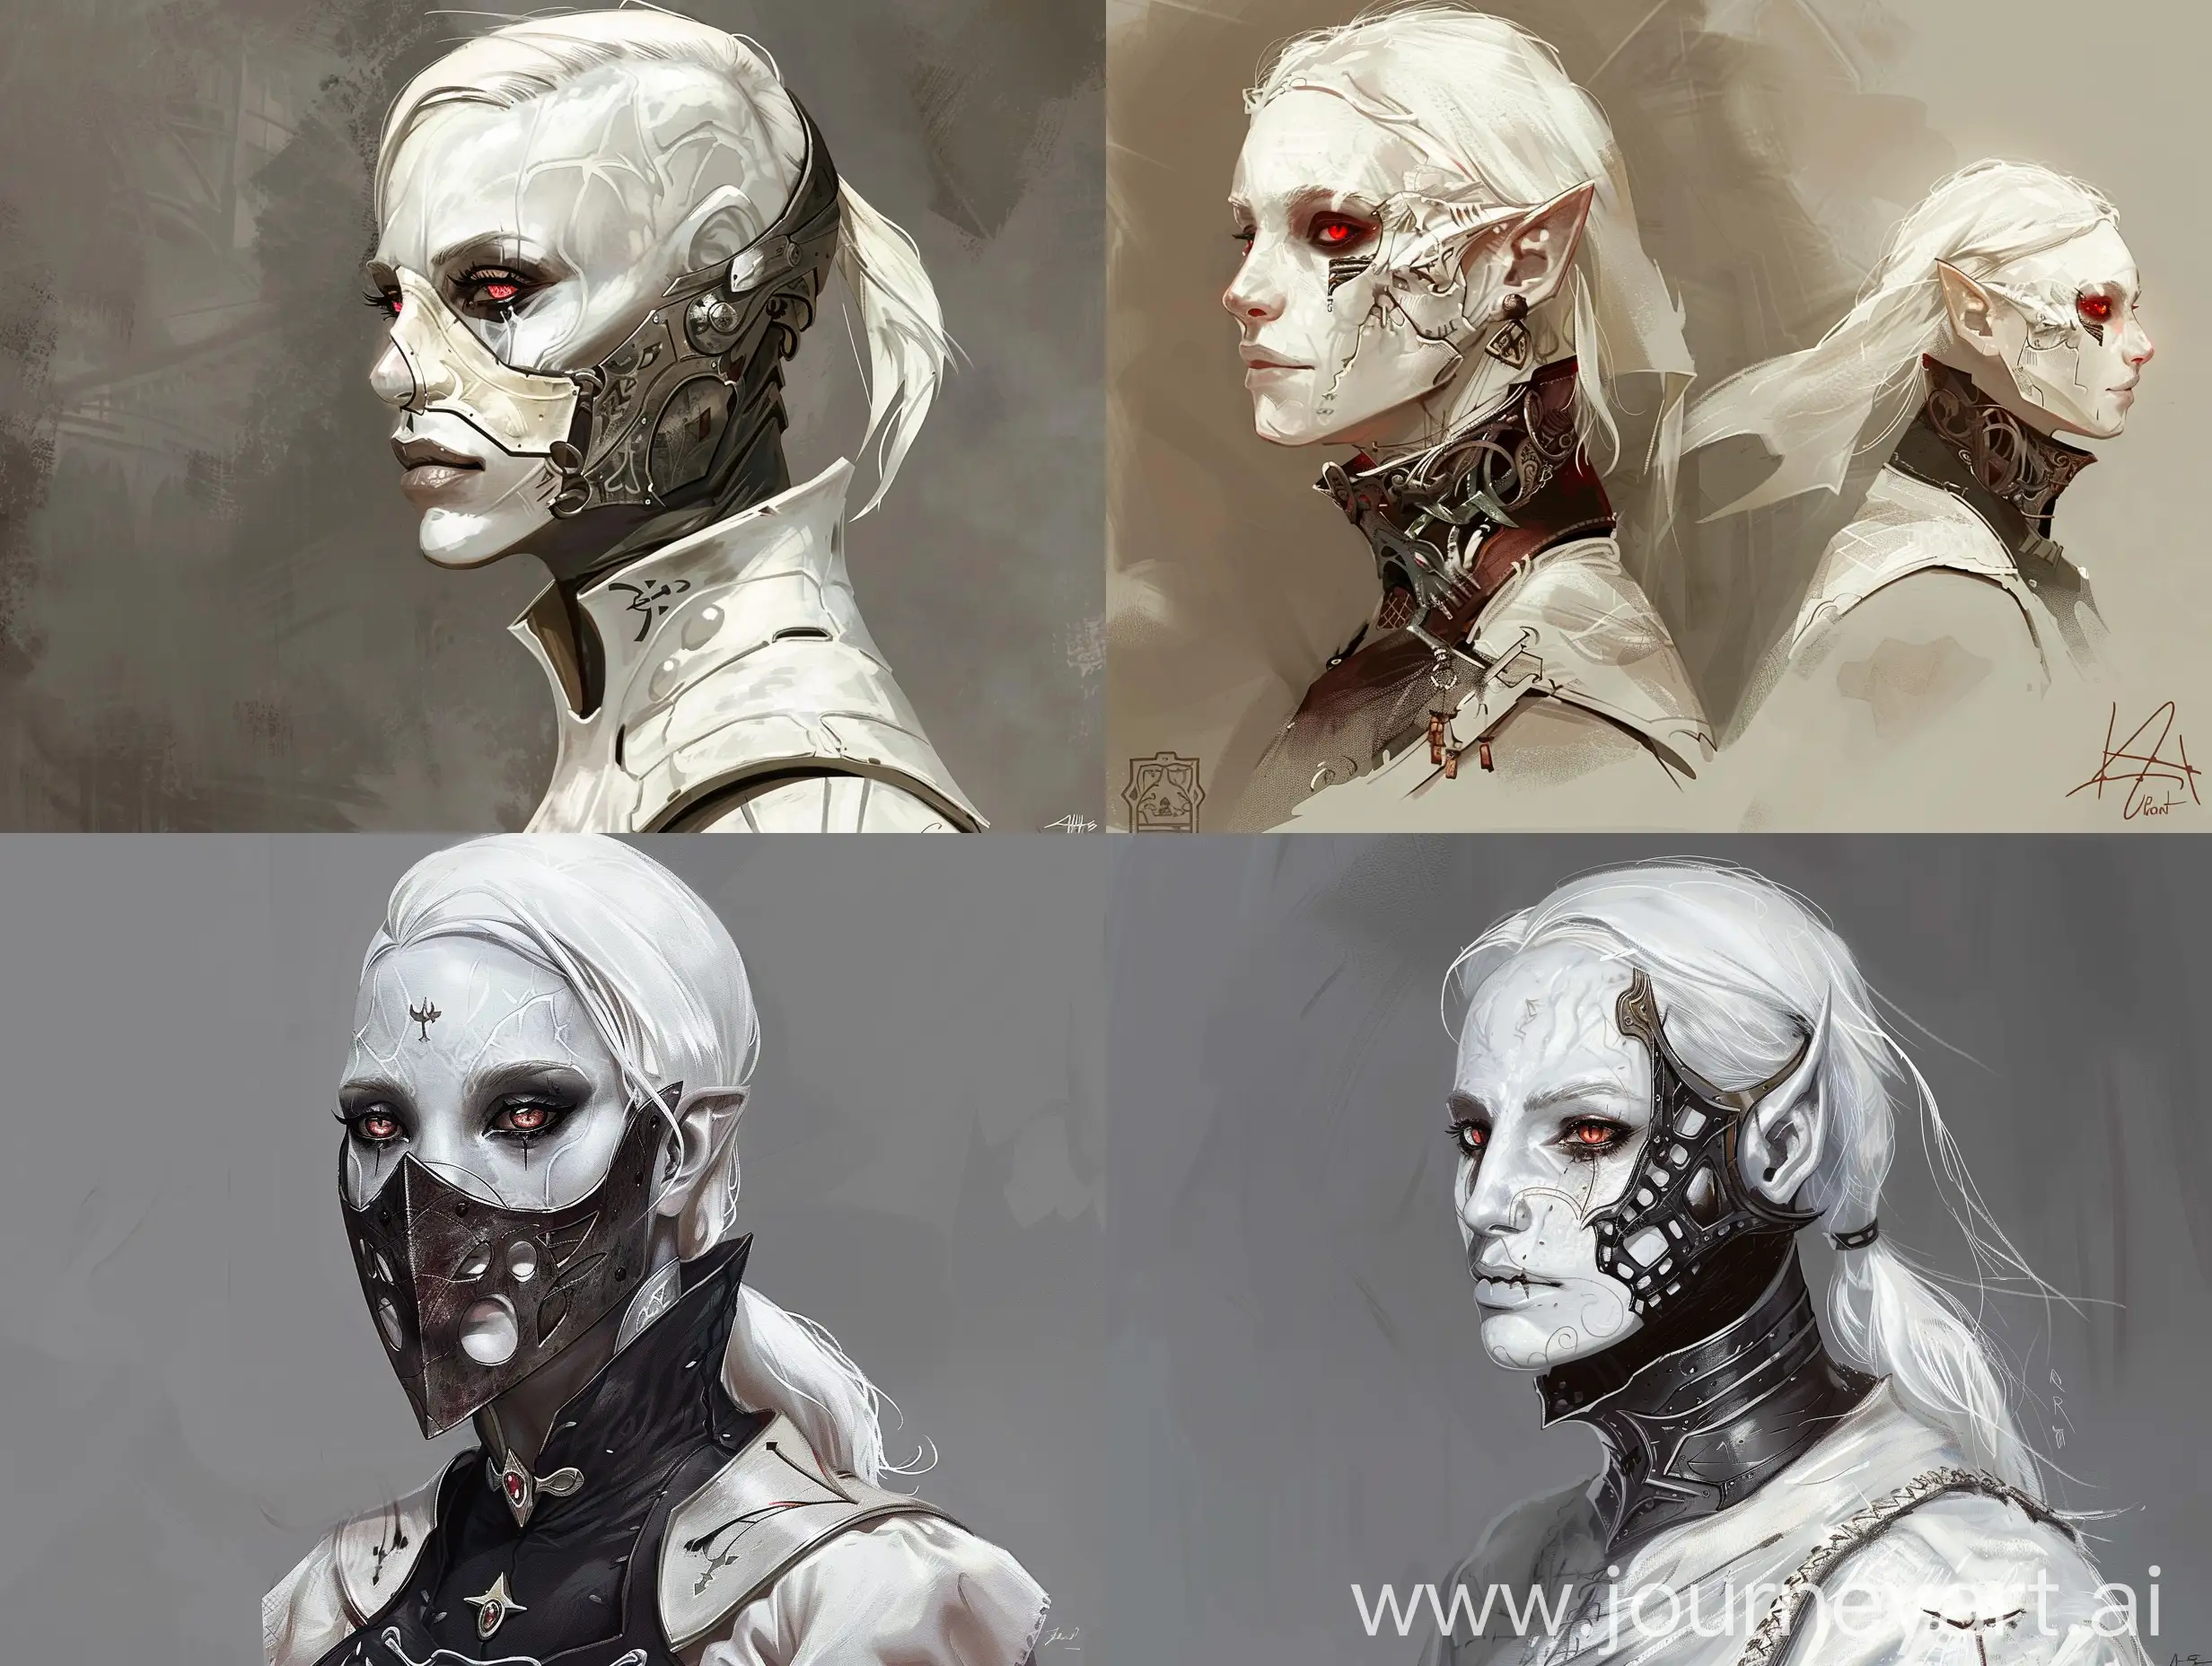 Character concept art from dragon age,A female inquisitor with white skin and white hair and scarlet eyes, a metal mask on the lower half of her face, full body view